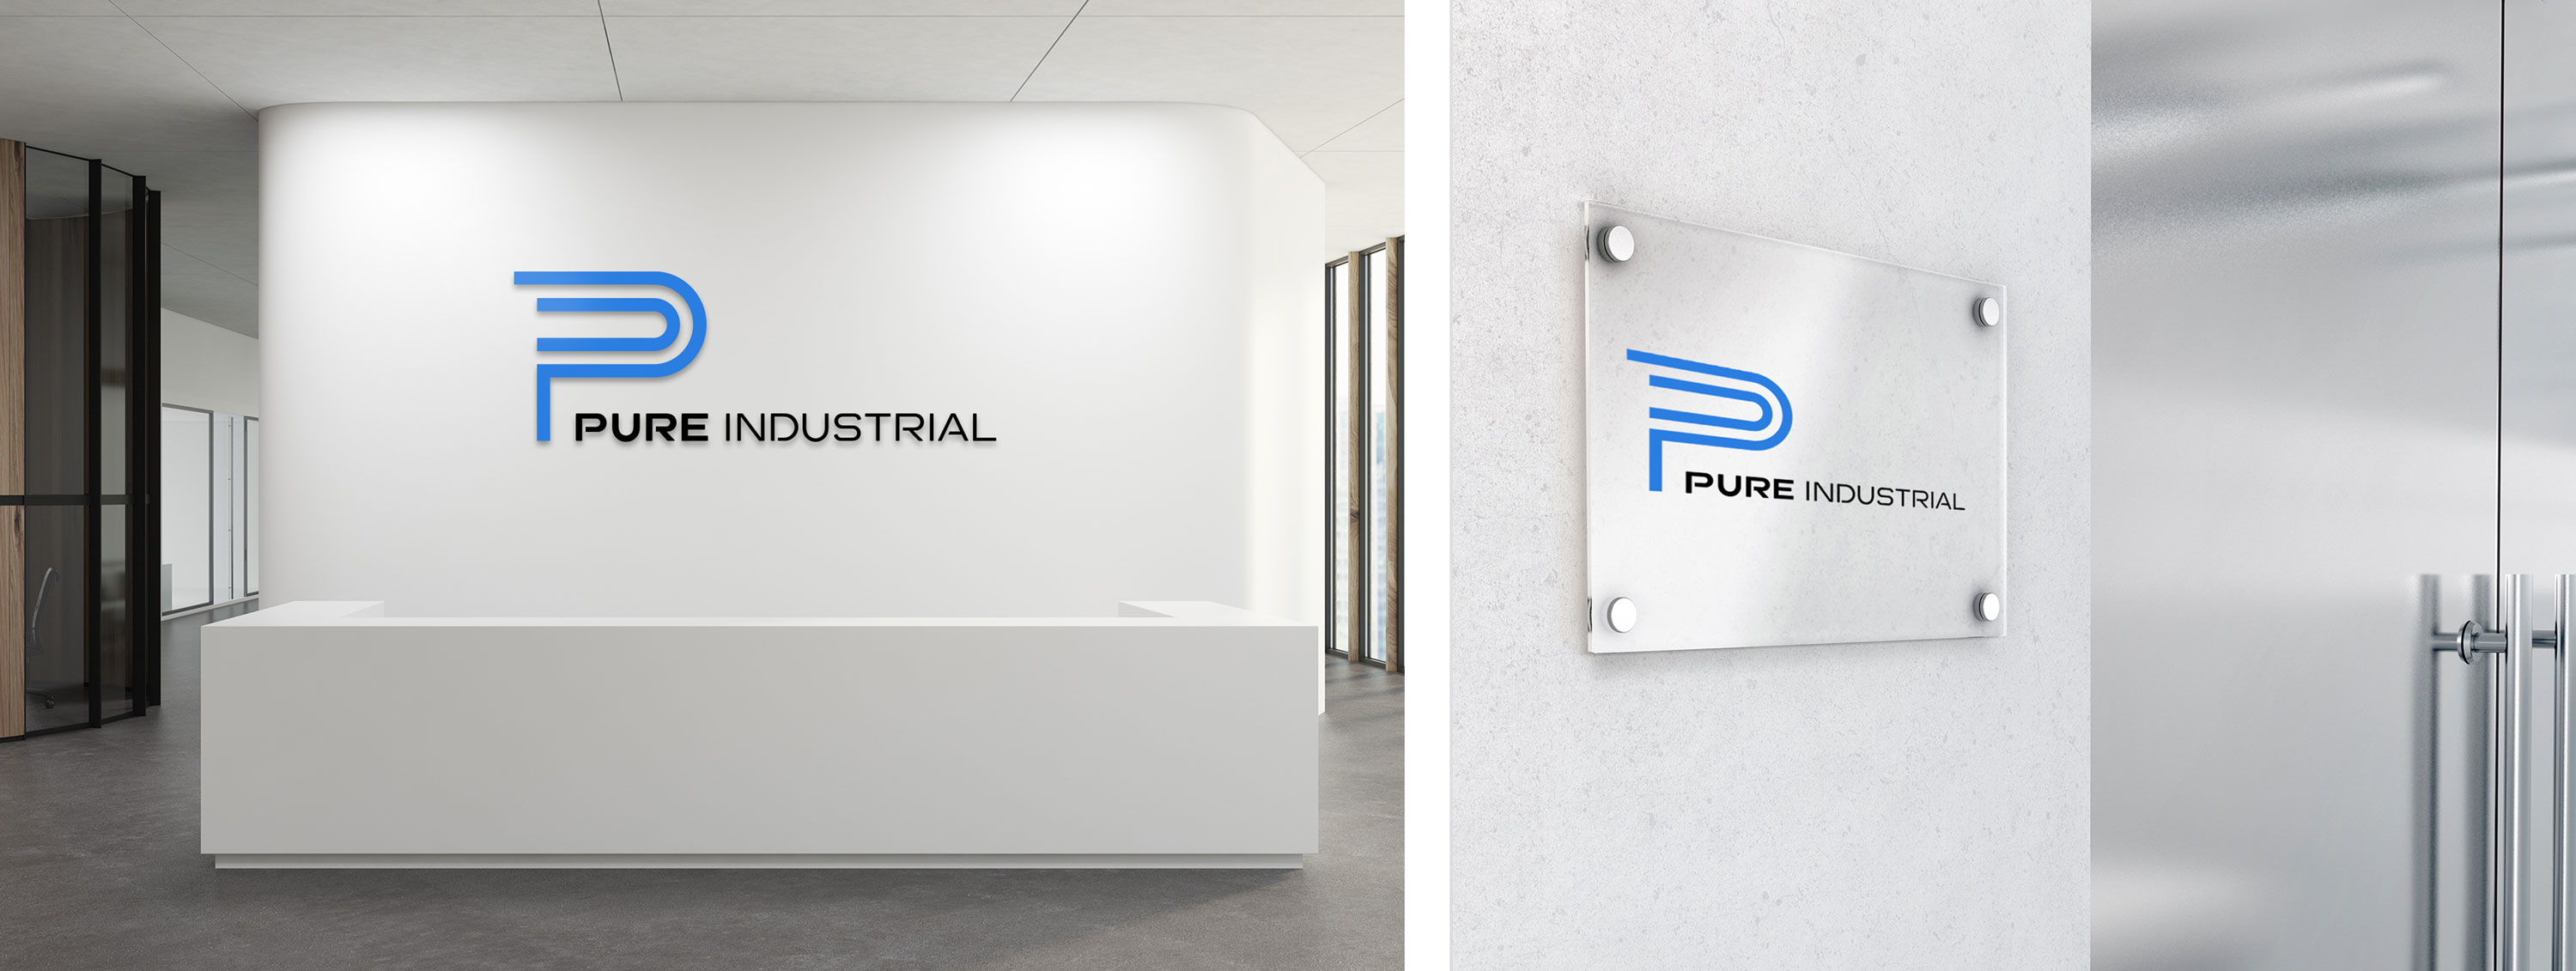 Pure Industrial building interior signage, Blue and black logo on glass